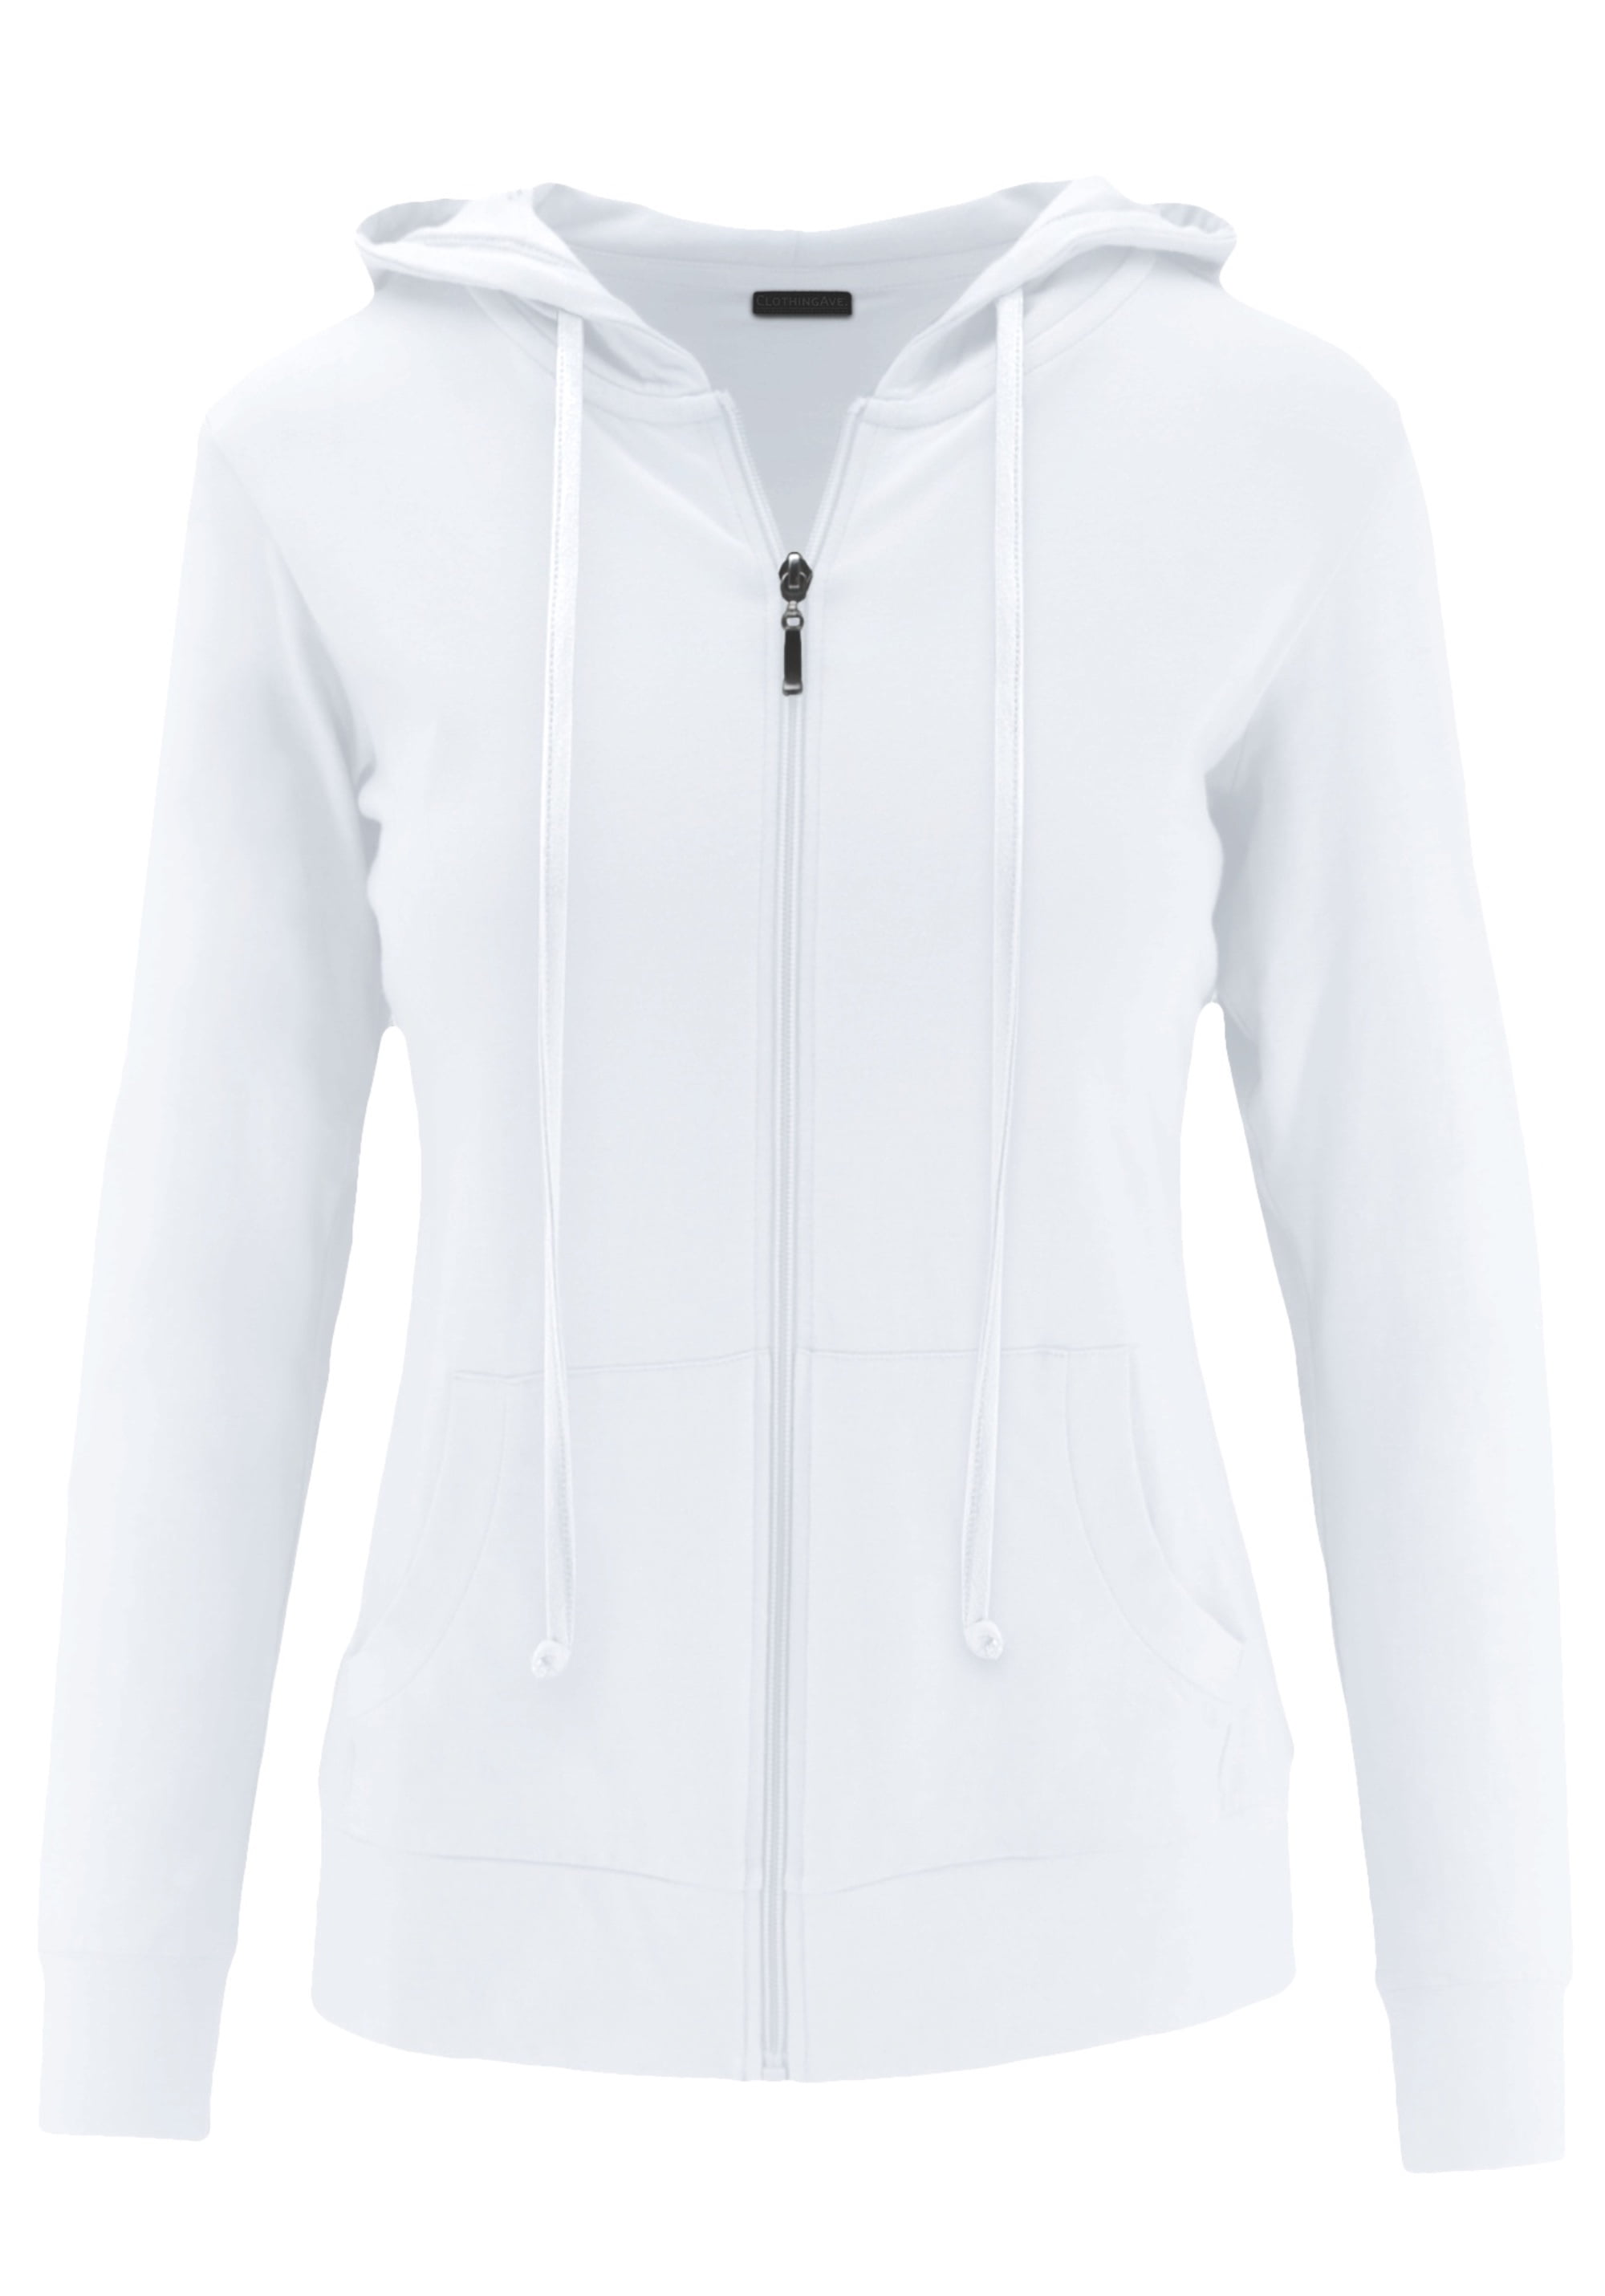 ClothingAve - ClothingAve. Women's Lightweight Comfy Zip-Up Hoodie ...